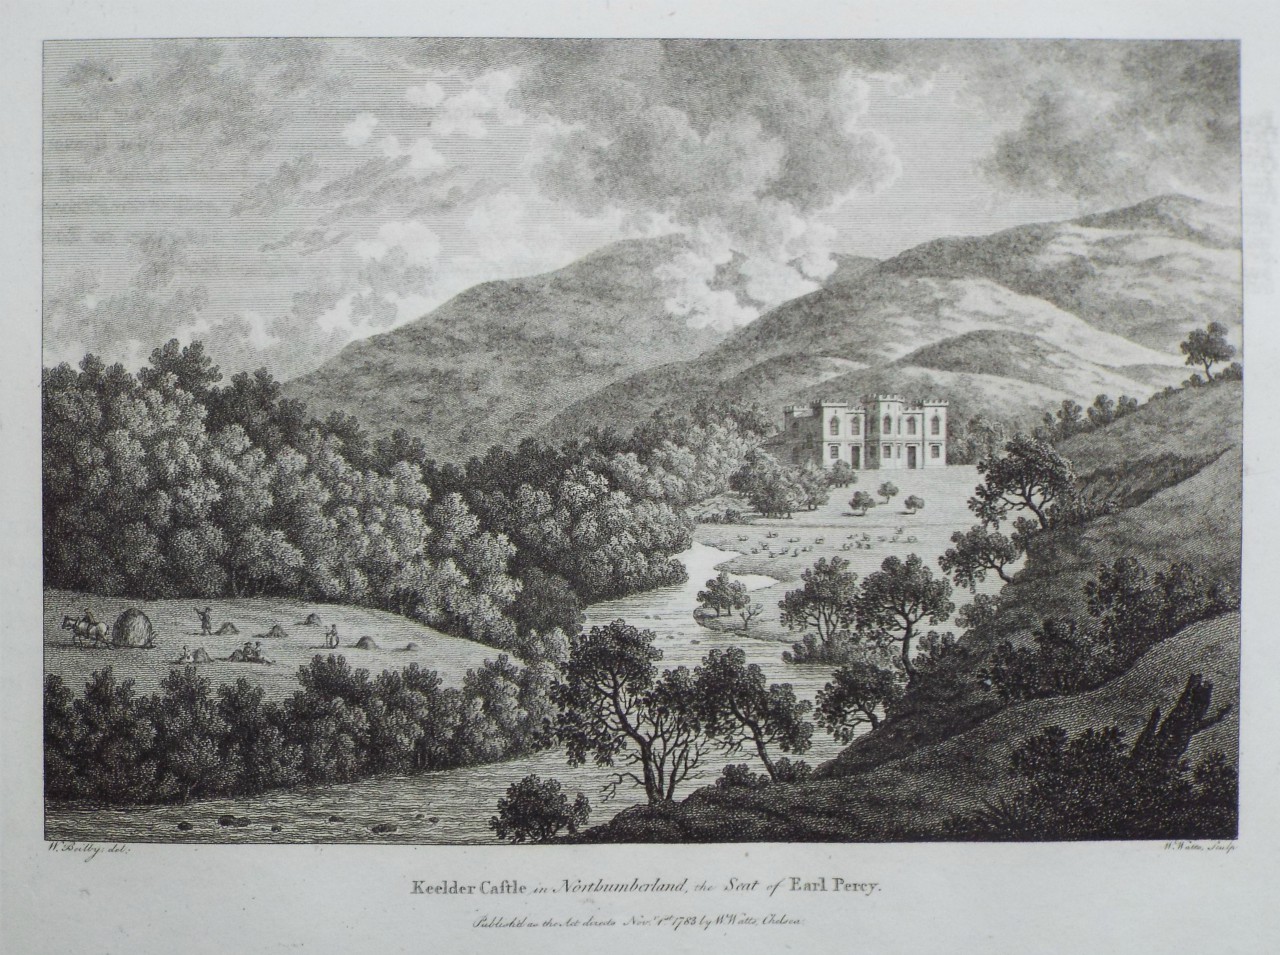 Print - Keelder Castle in Northumberland, the Seat of Earl Percy. - Watts